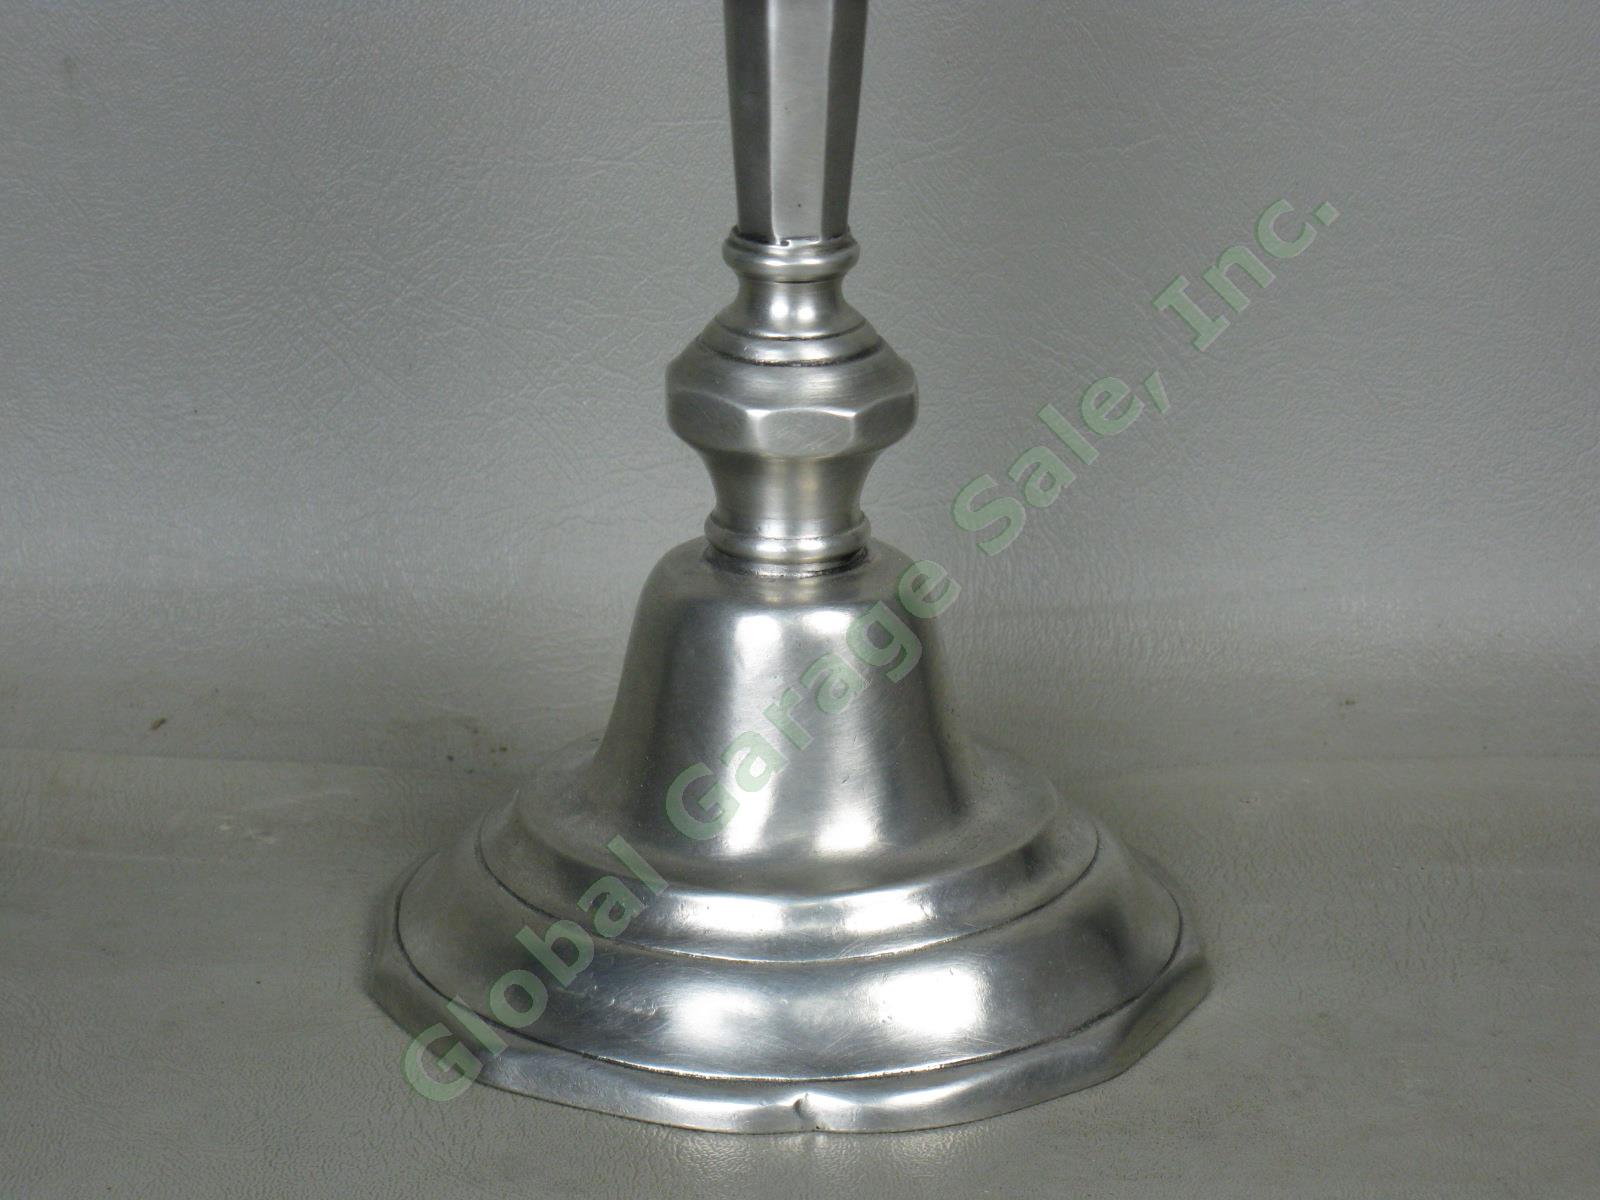 NEW Match Pewter Genoa Candlestick 9.75" Made In Italy $220 Retail No Reserve! 3